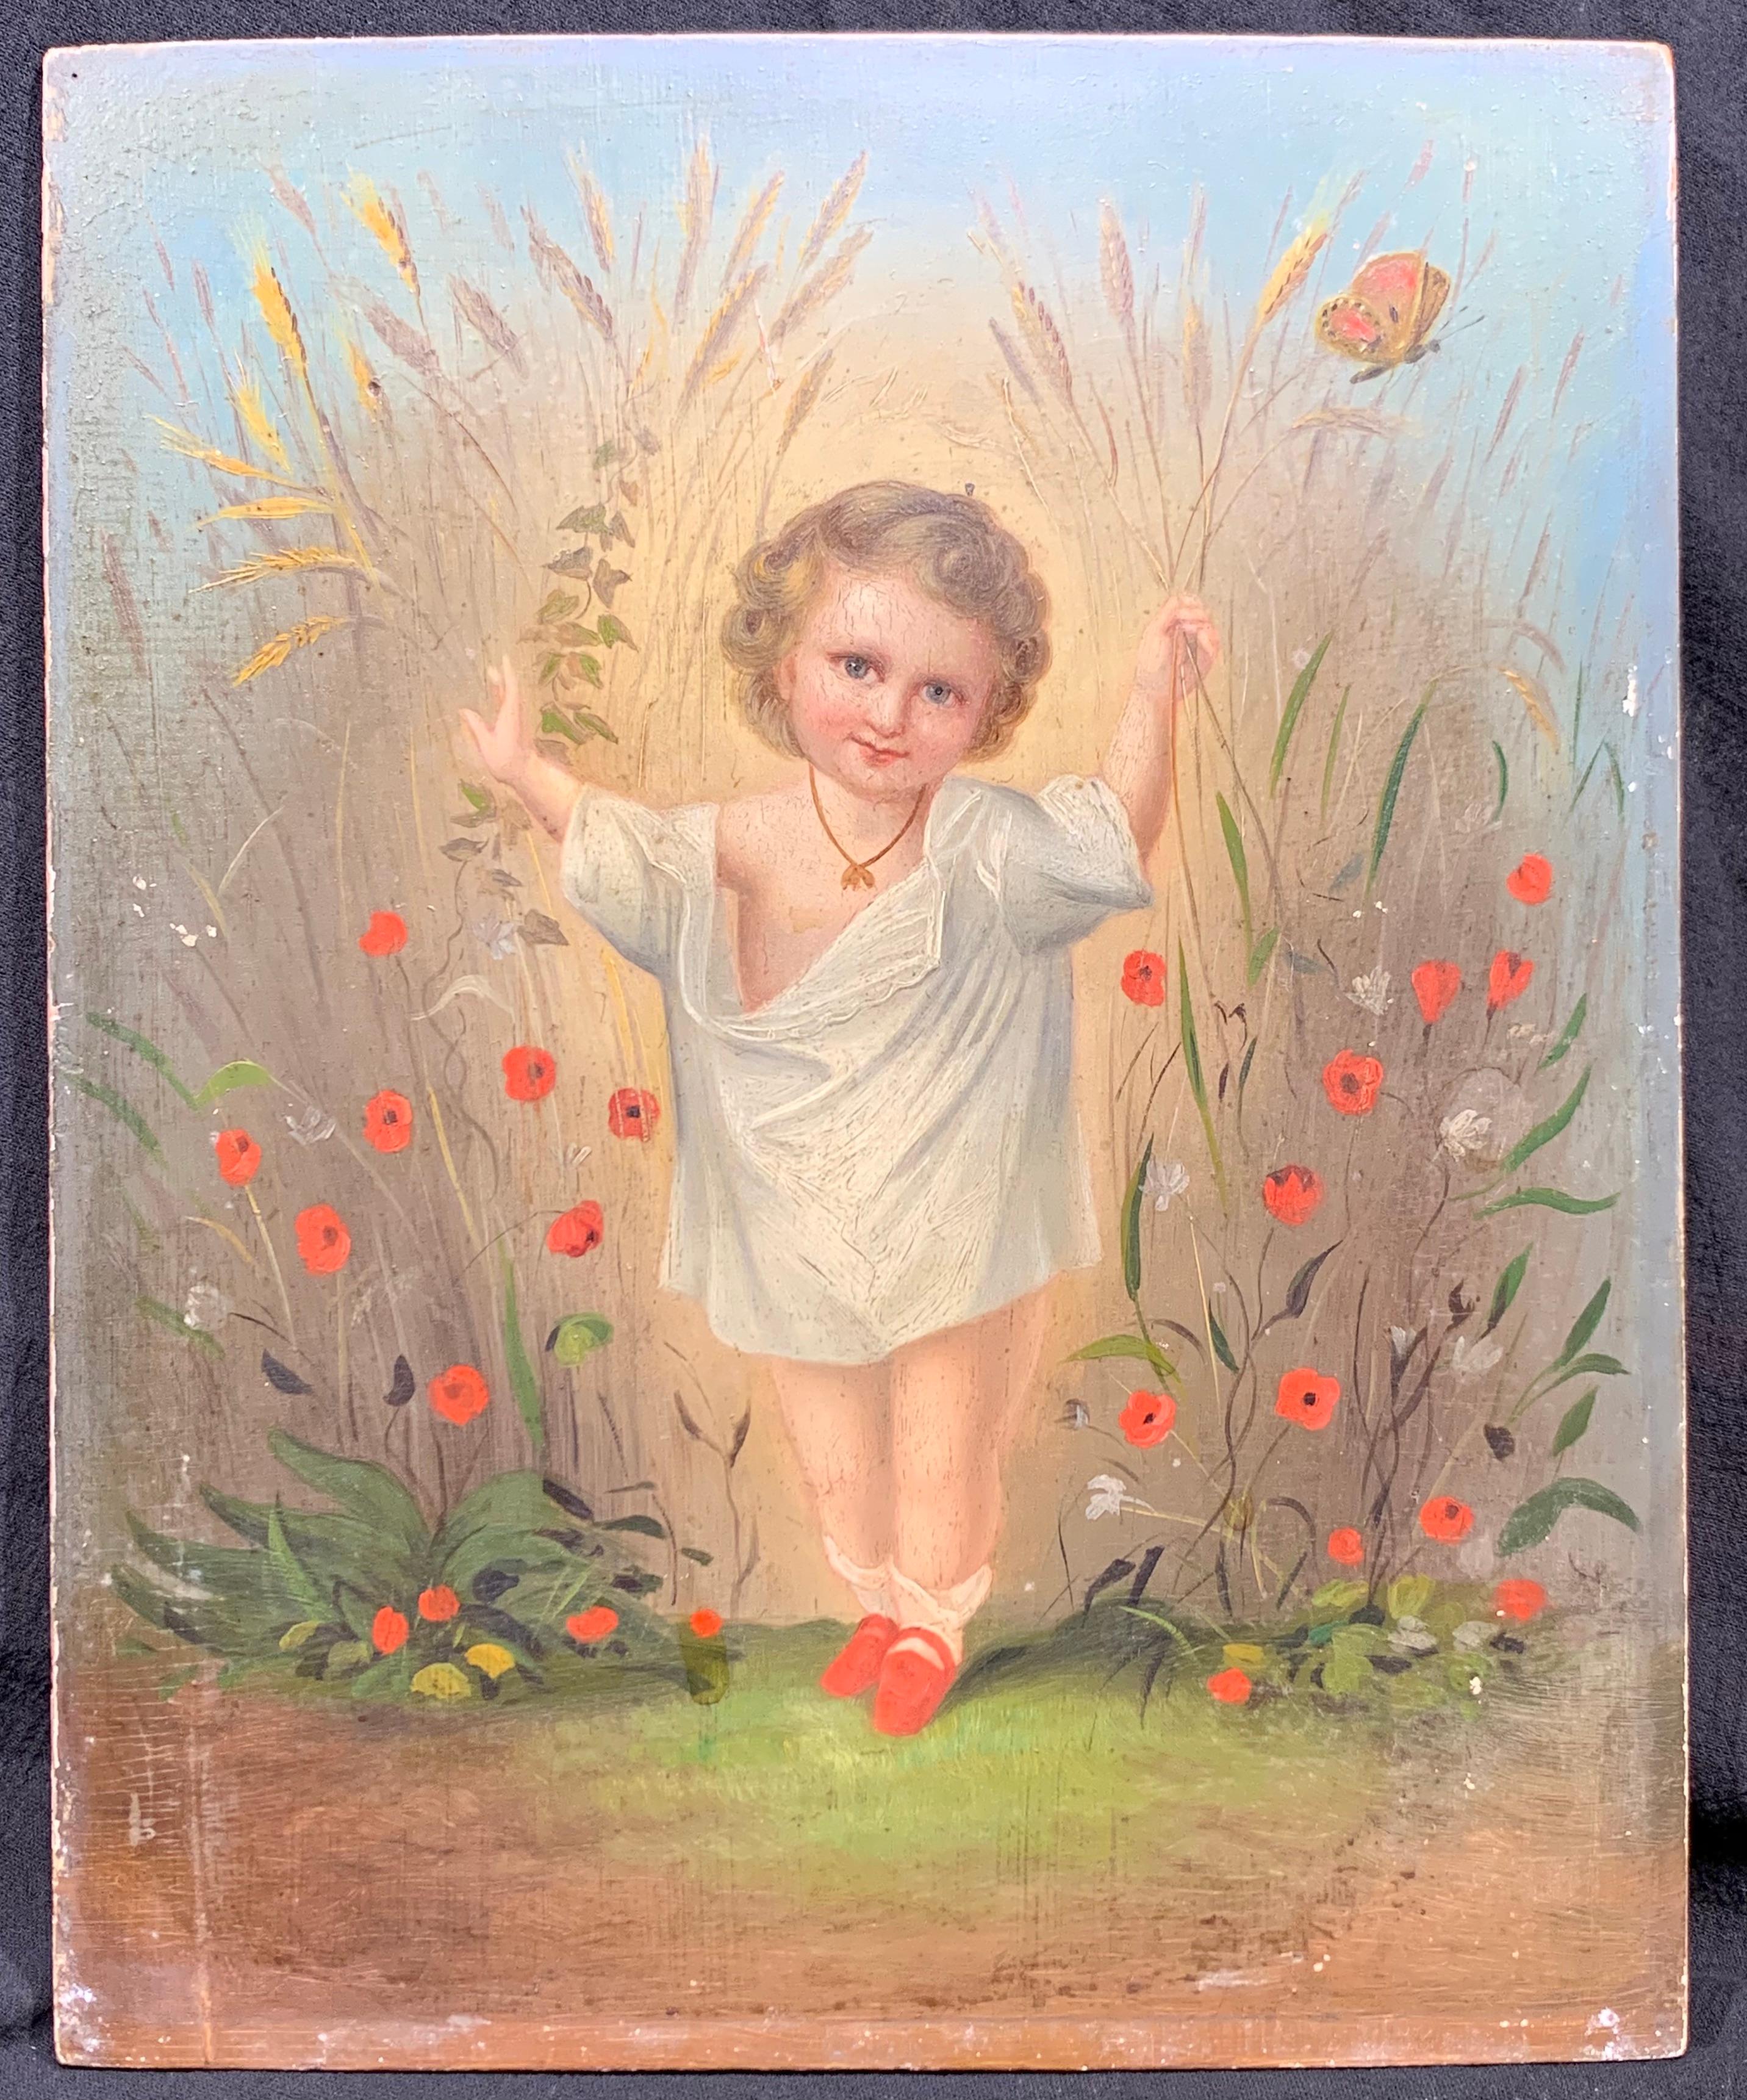 Allegory of a Wheat Harvest (Portrait of young child), ca. 1850,  by unknown American artist. Oil on panel measures 9 x 11 inches. Unframed. Original condition with no cleaning or conservation. Very minor areas of paint loss. Unsigned. 



